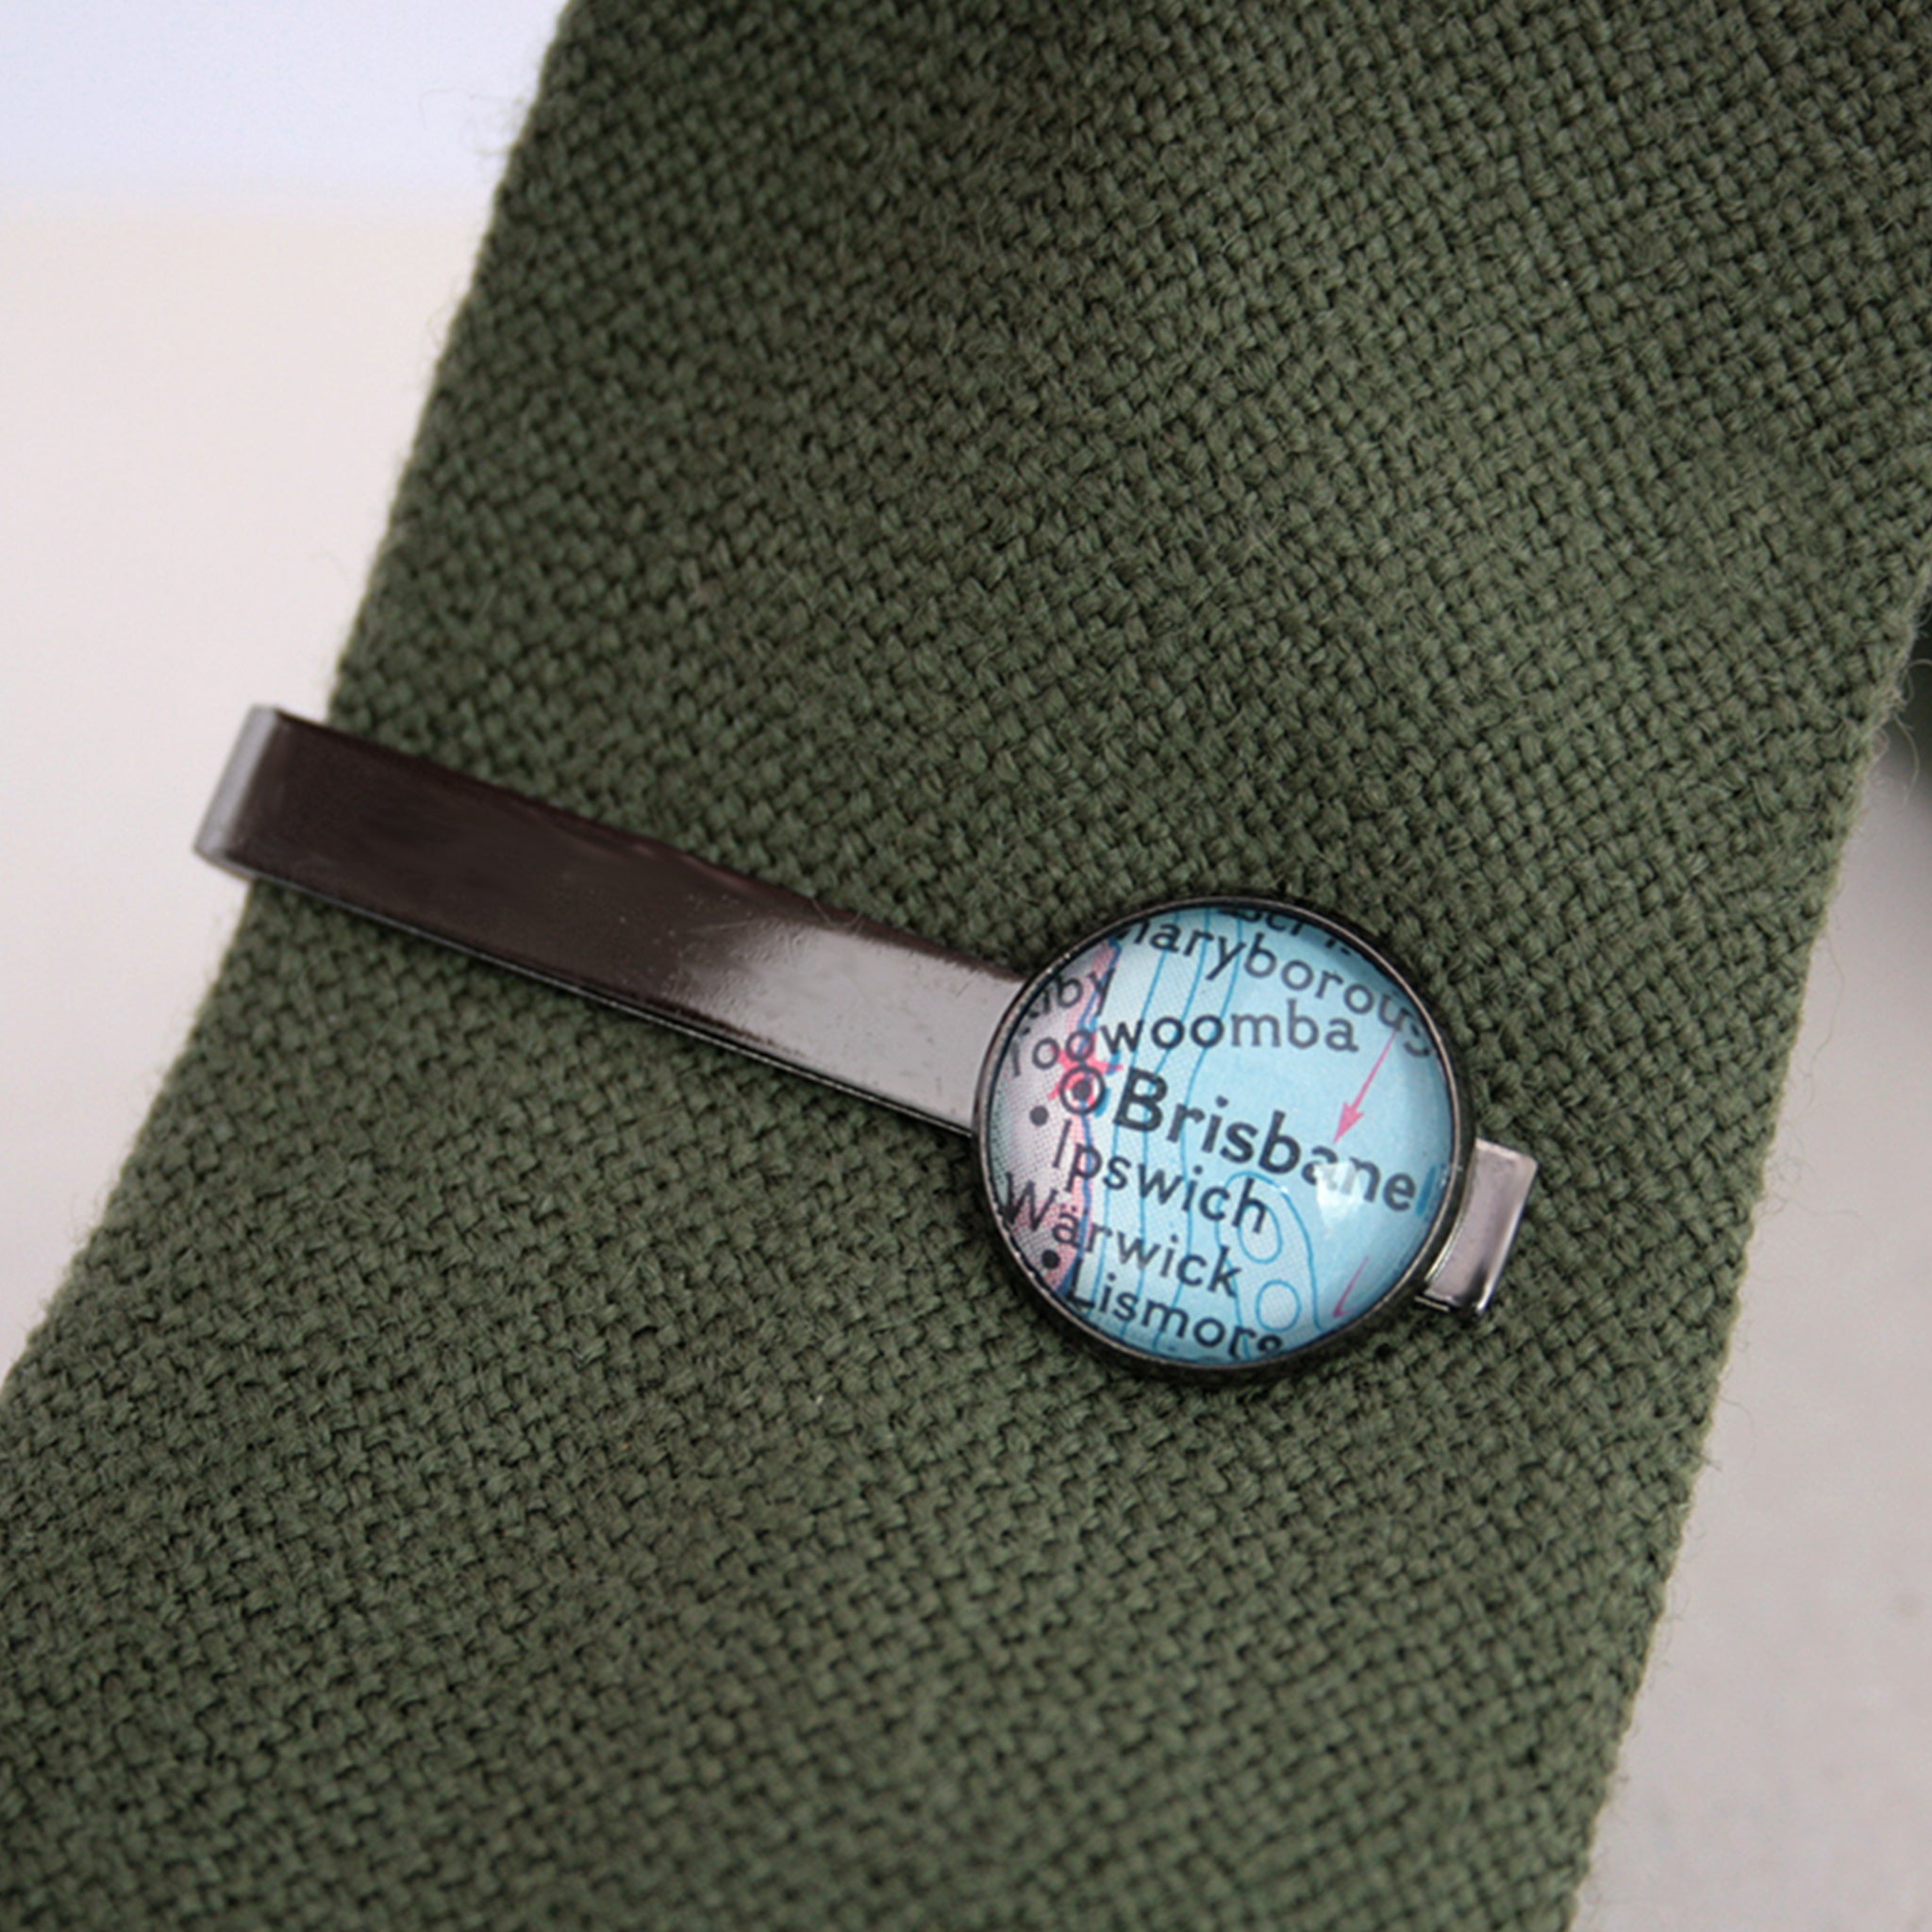 Personalised Tie Clip in gunmetal black color featuring map of Brisbane on a green tie